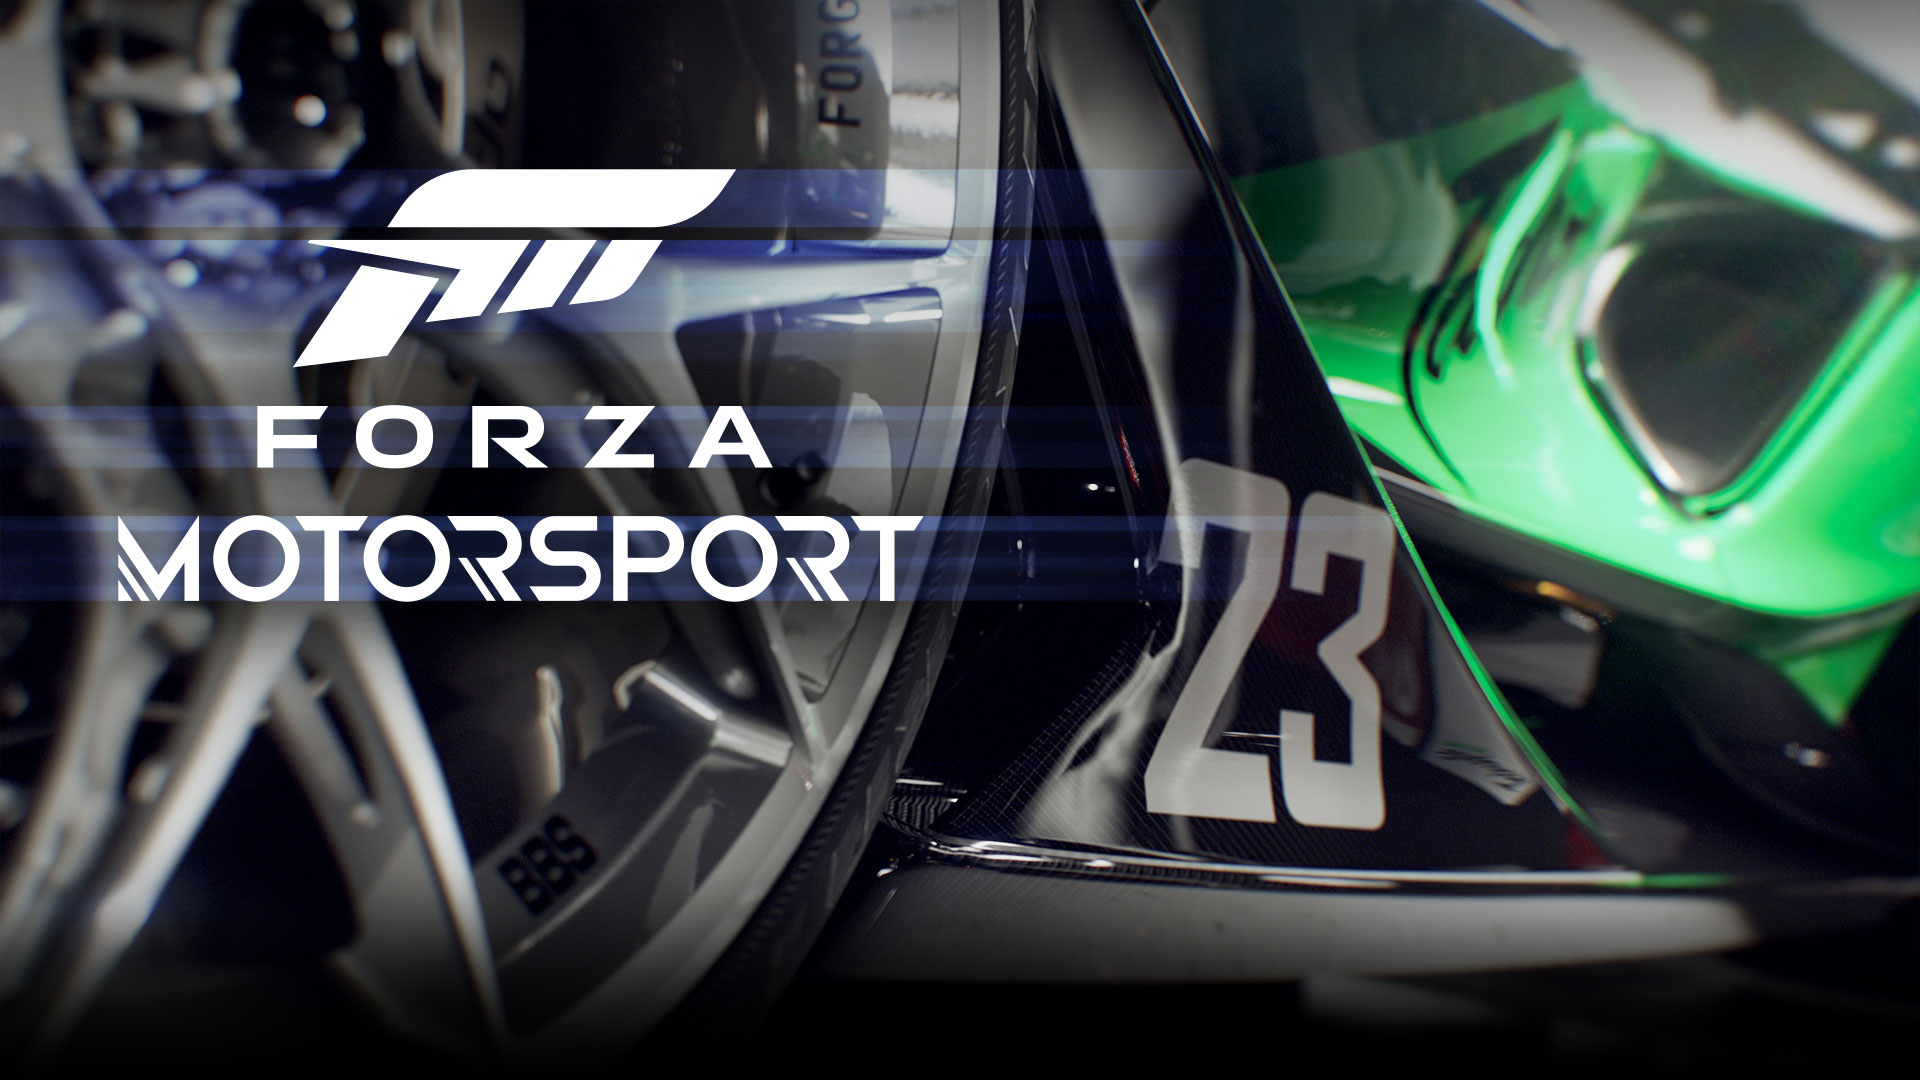 Forza Motorsport Xbox Resolution and FPS Confirmed